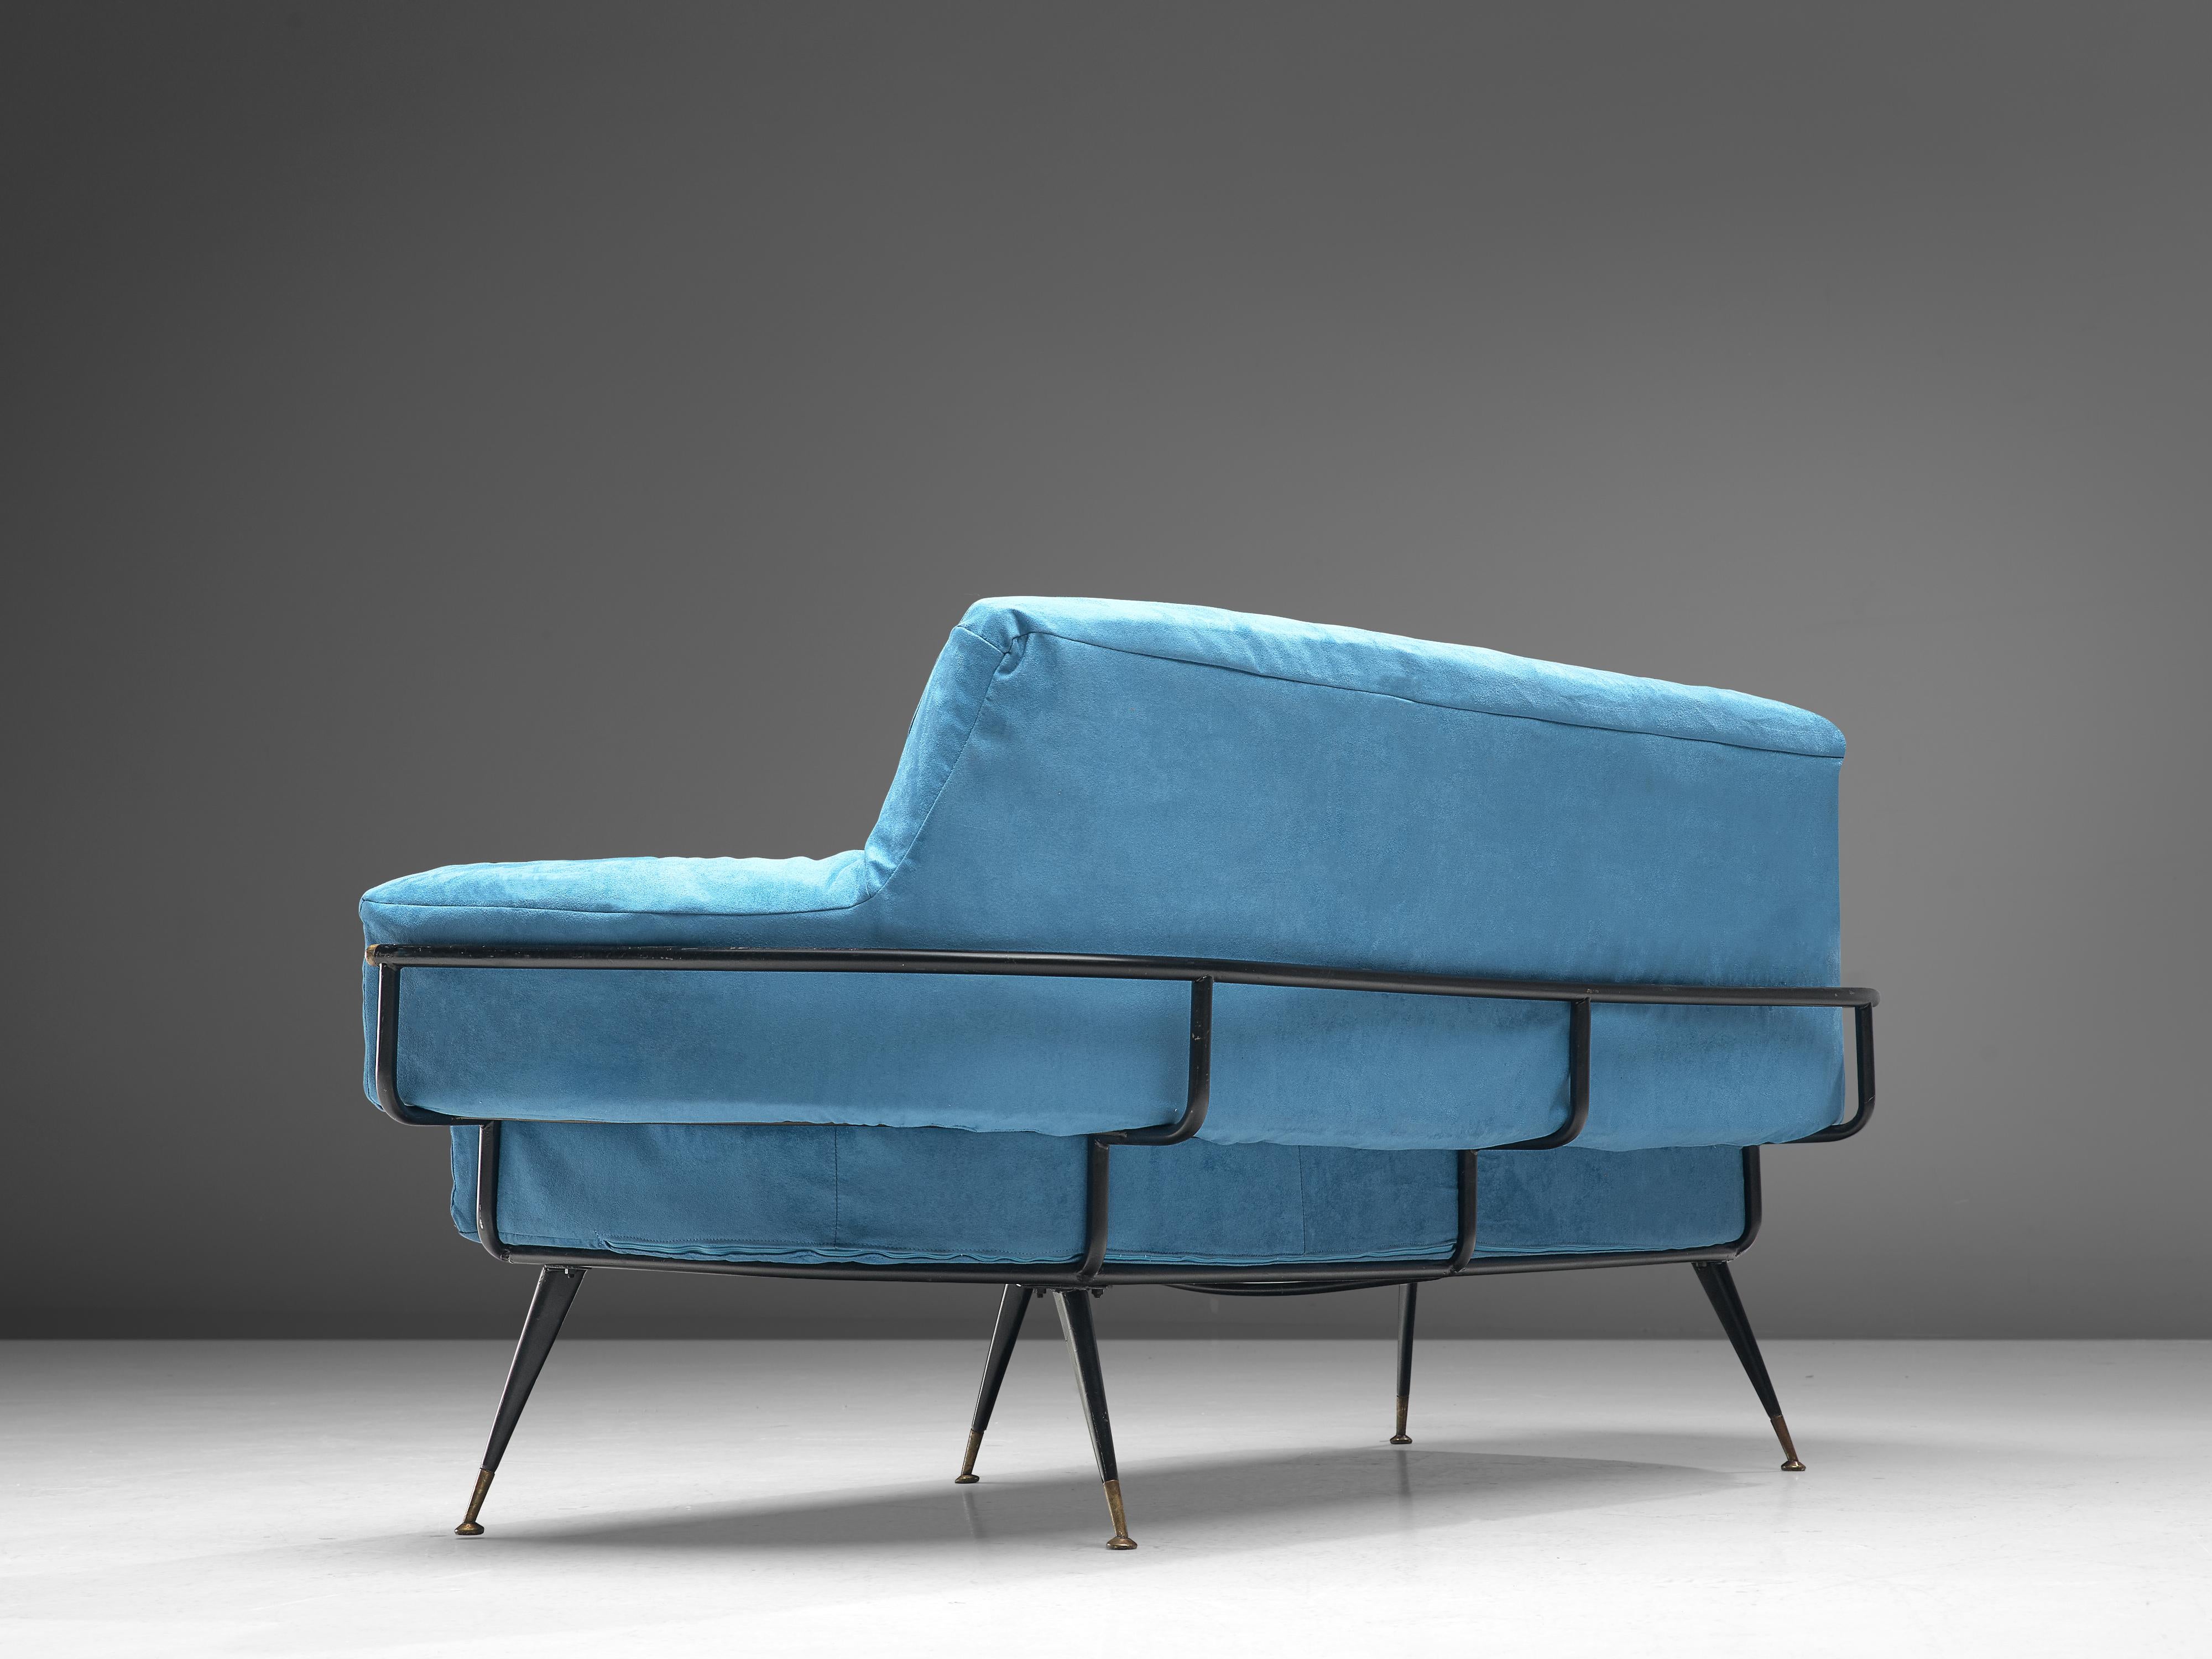 Sofa, blue velvet, metal and brass, Italy, 1950s

Elegant sofa with voluptuous armrests. These wide armrests are balanced out by the slender and delicate metal legs that have a beautiful detail of brass at the feet. These five tapered dainty legs in